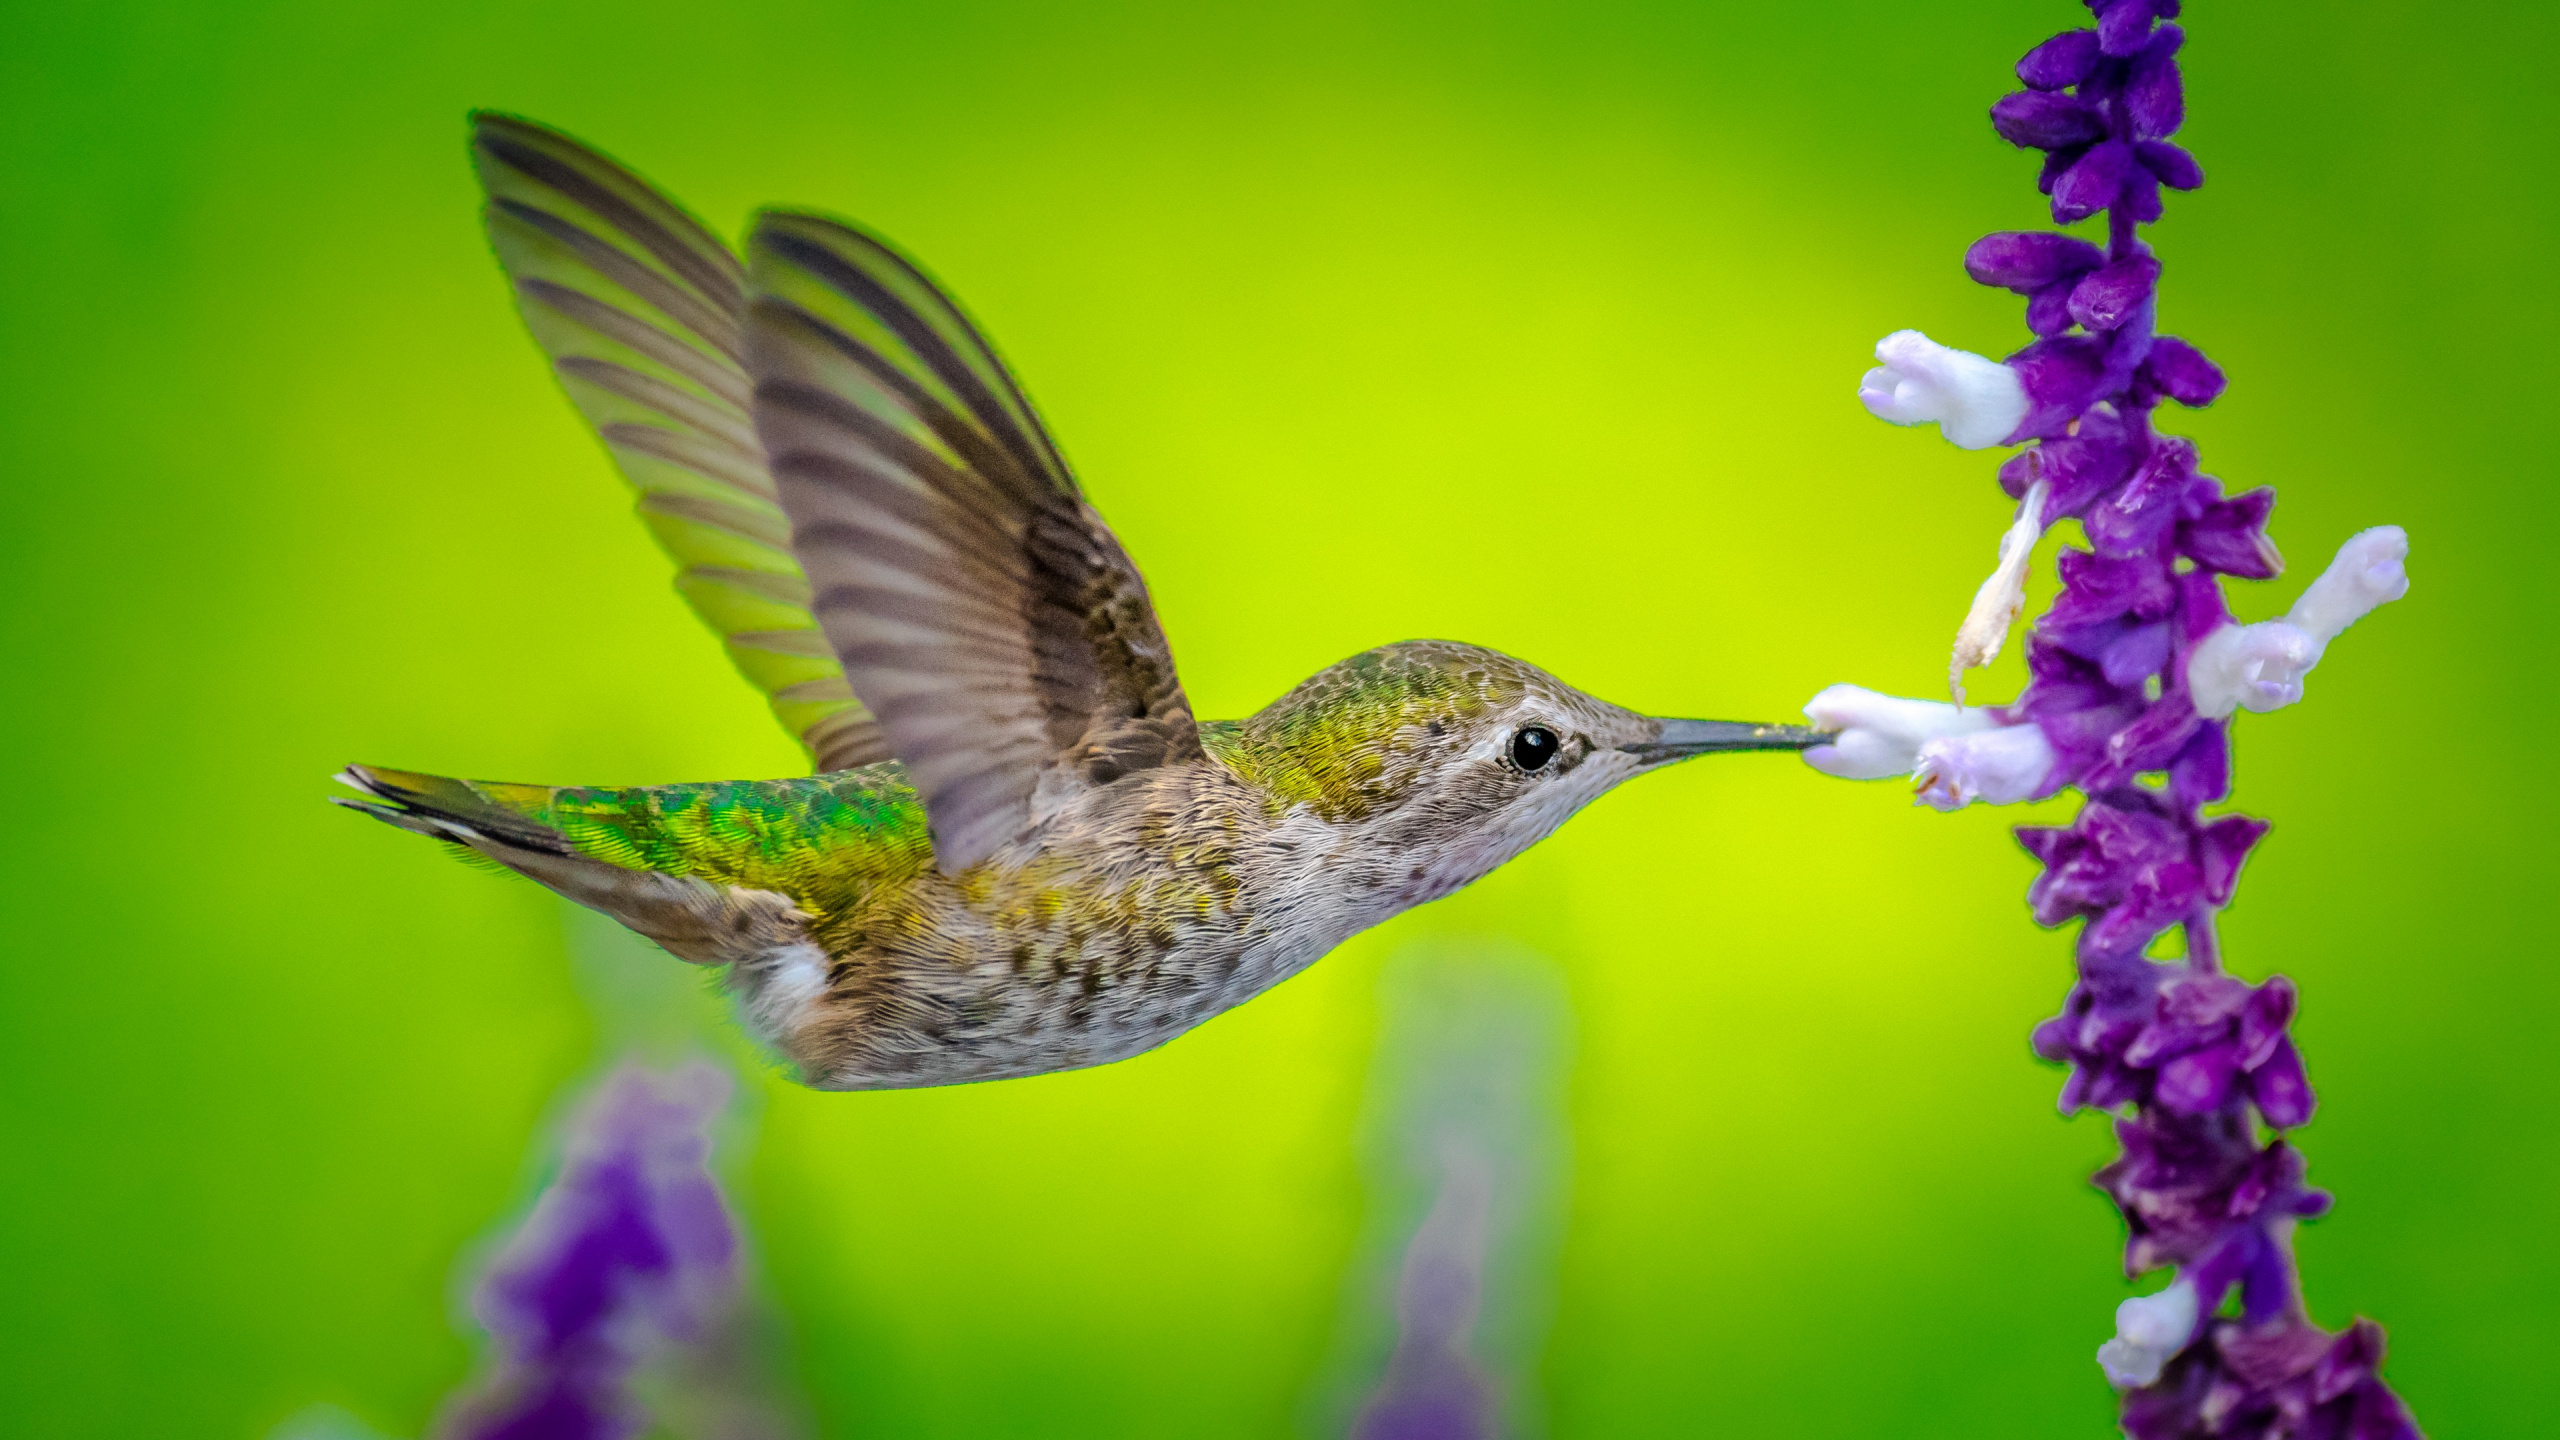 Green and White Humming Bird Flying. Wallpaper in 2560x1440 Resolution